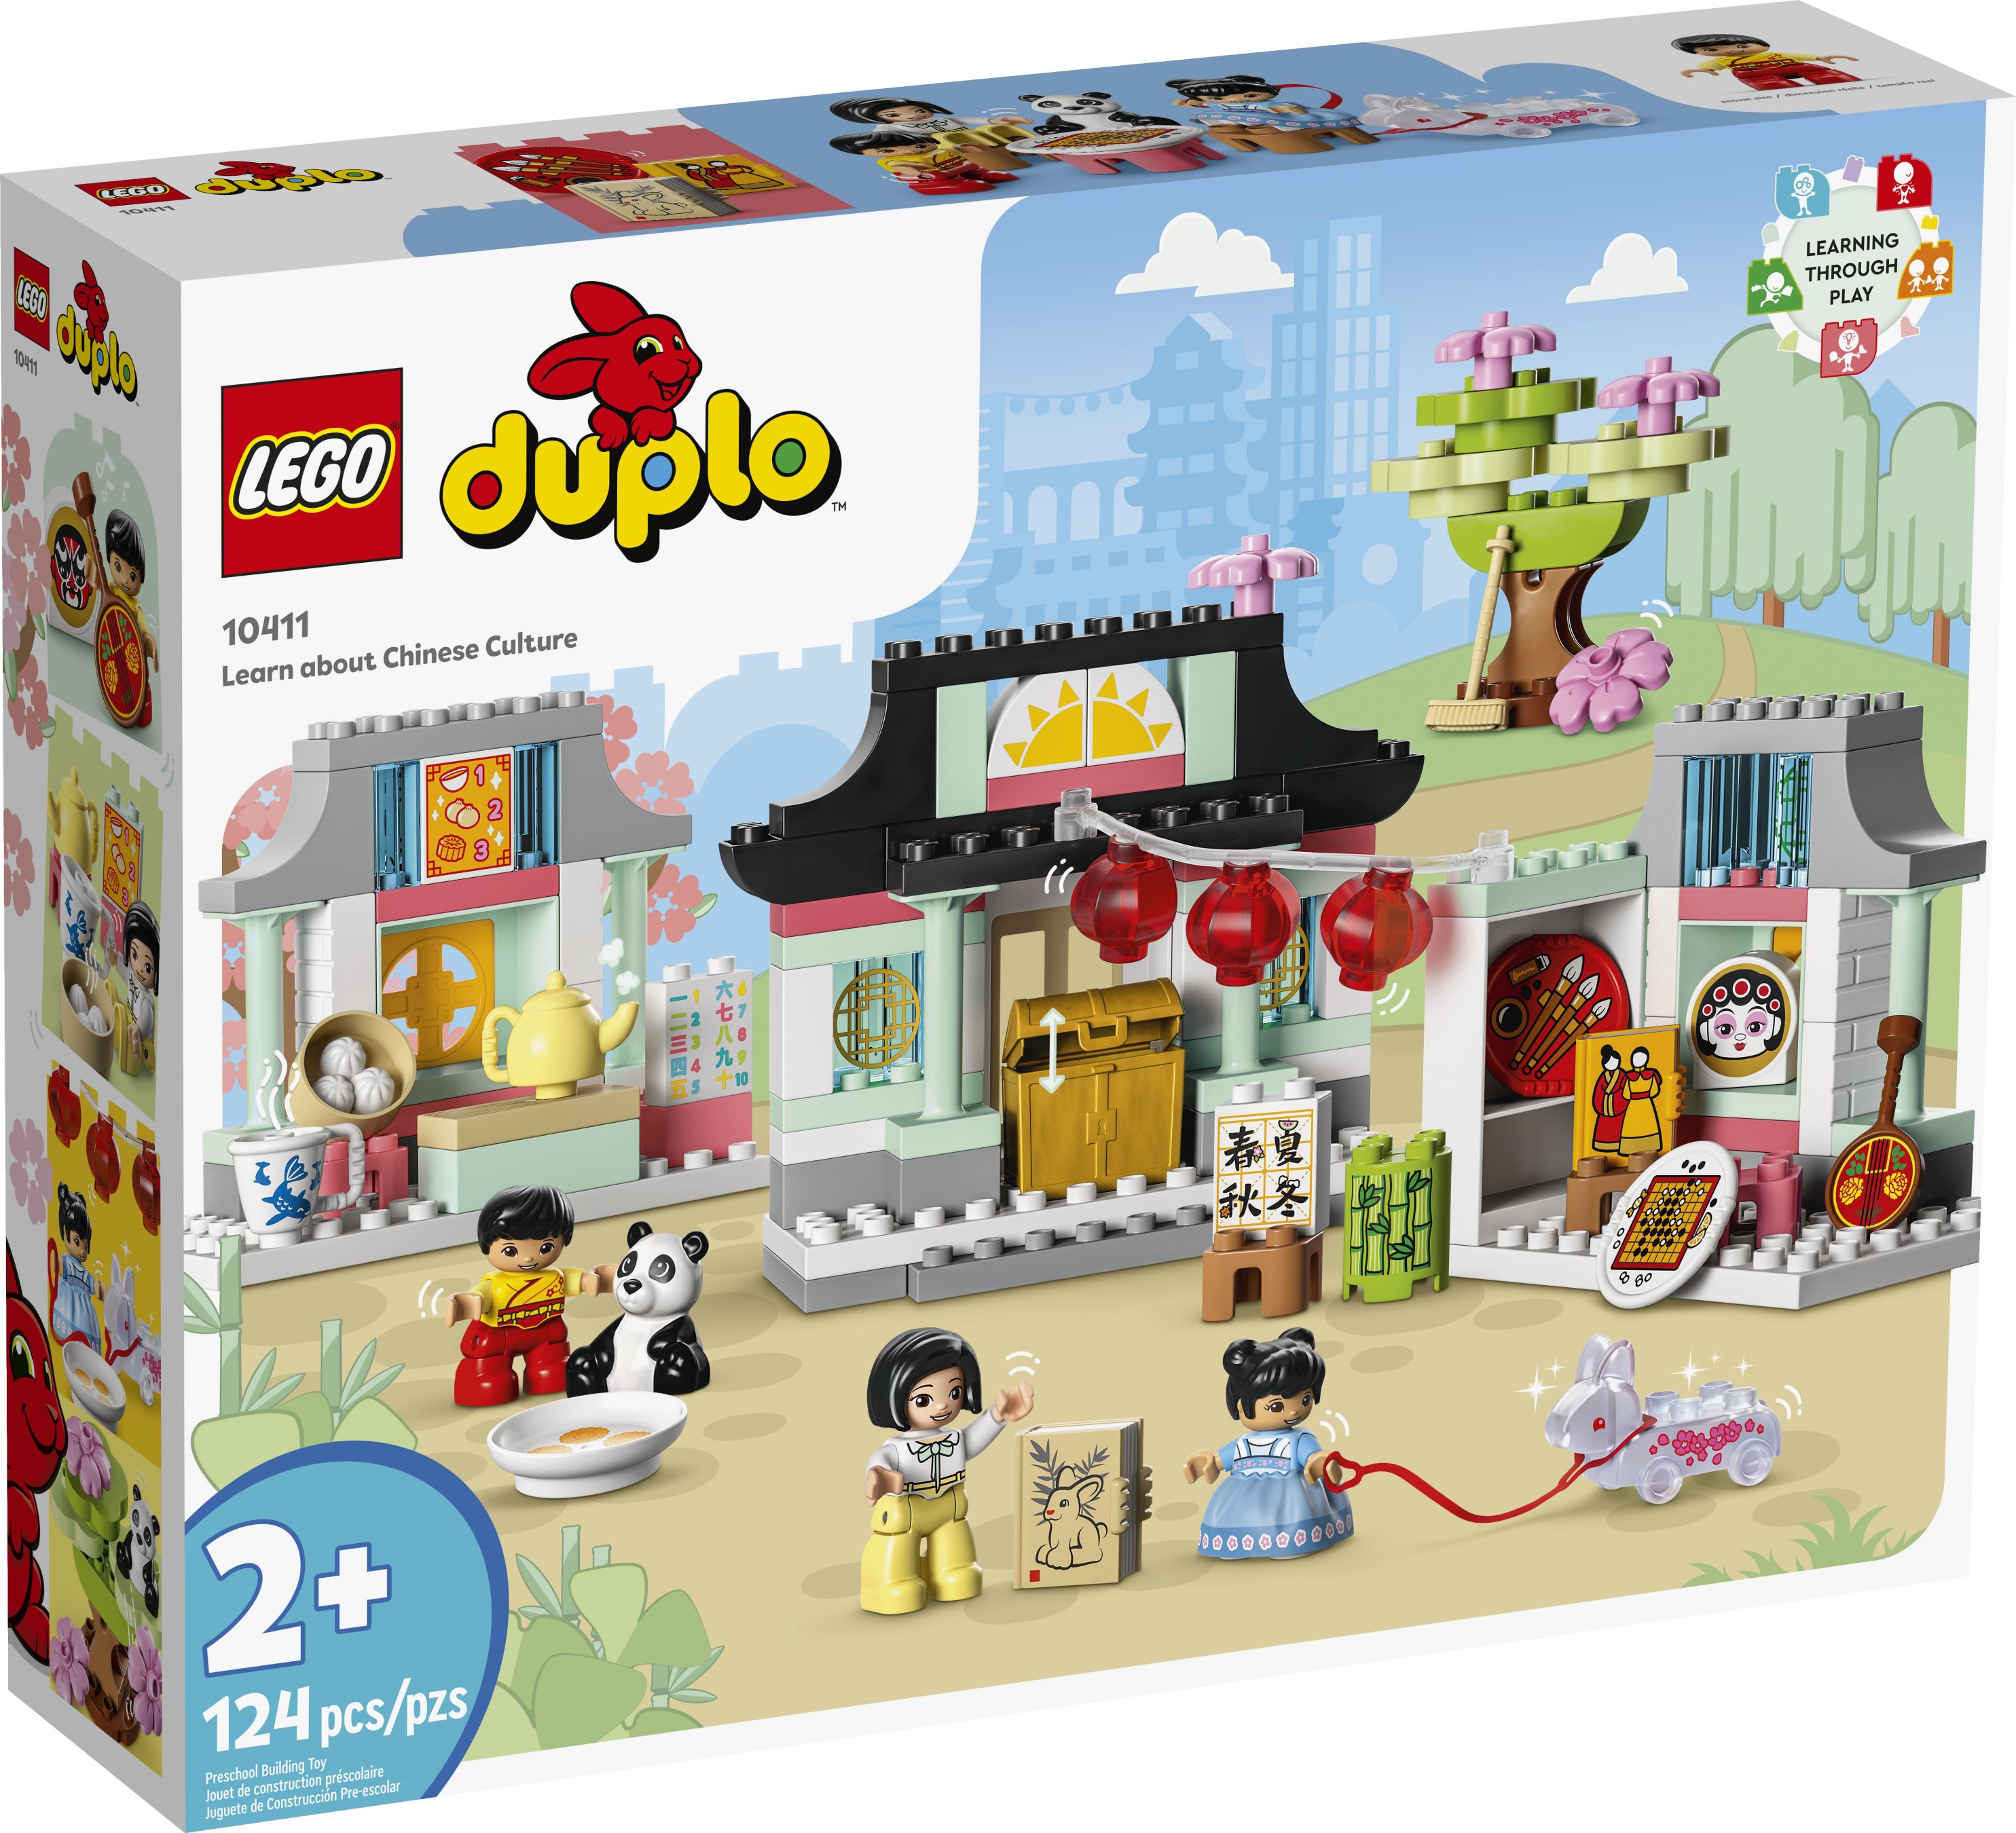 LEGO Duplo 10411 Learn about Chinese Culture LEGO_10411_Box1_v39.jpg